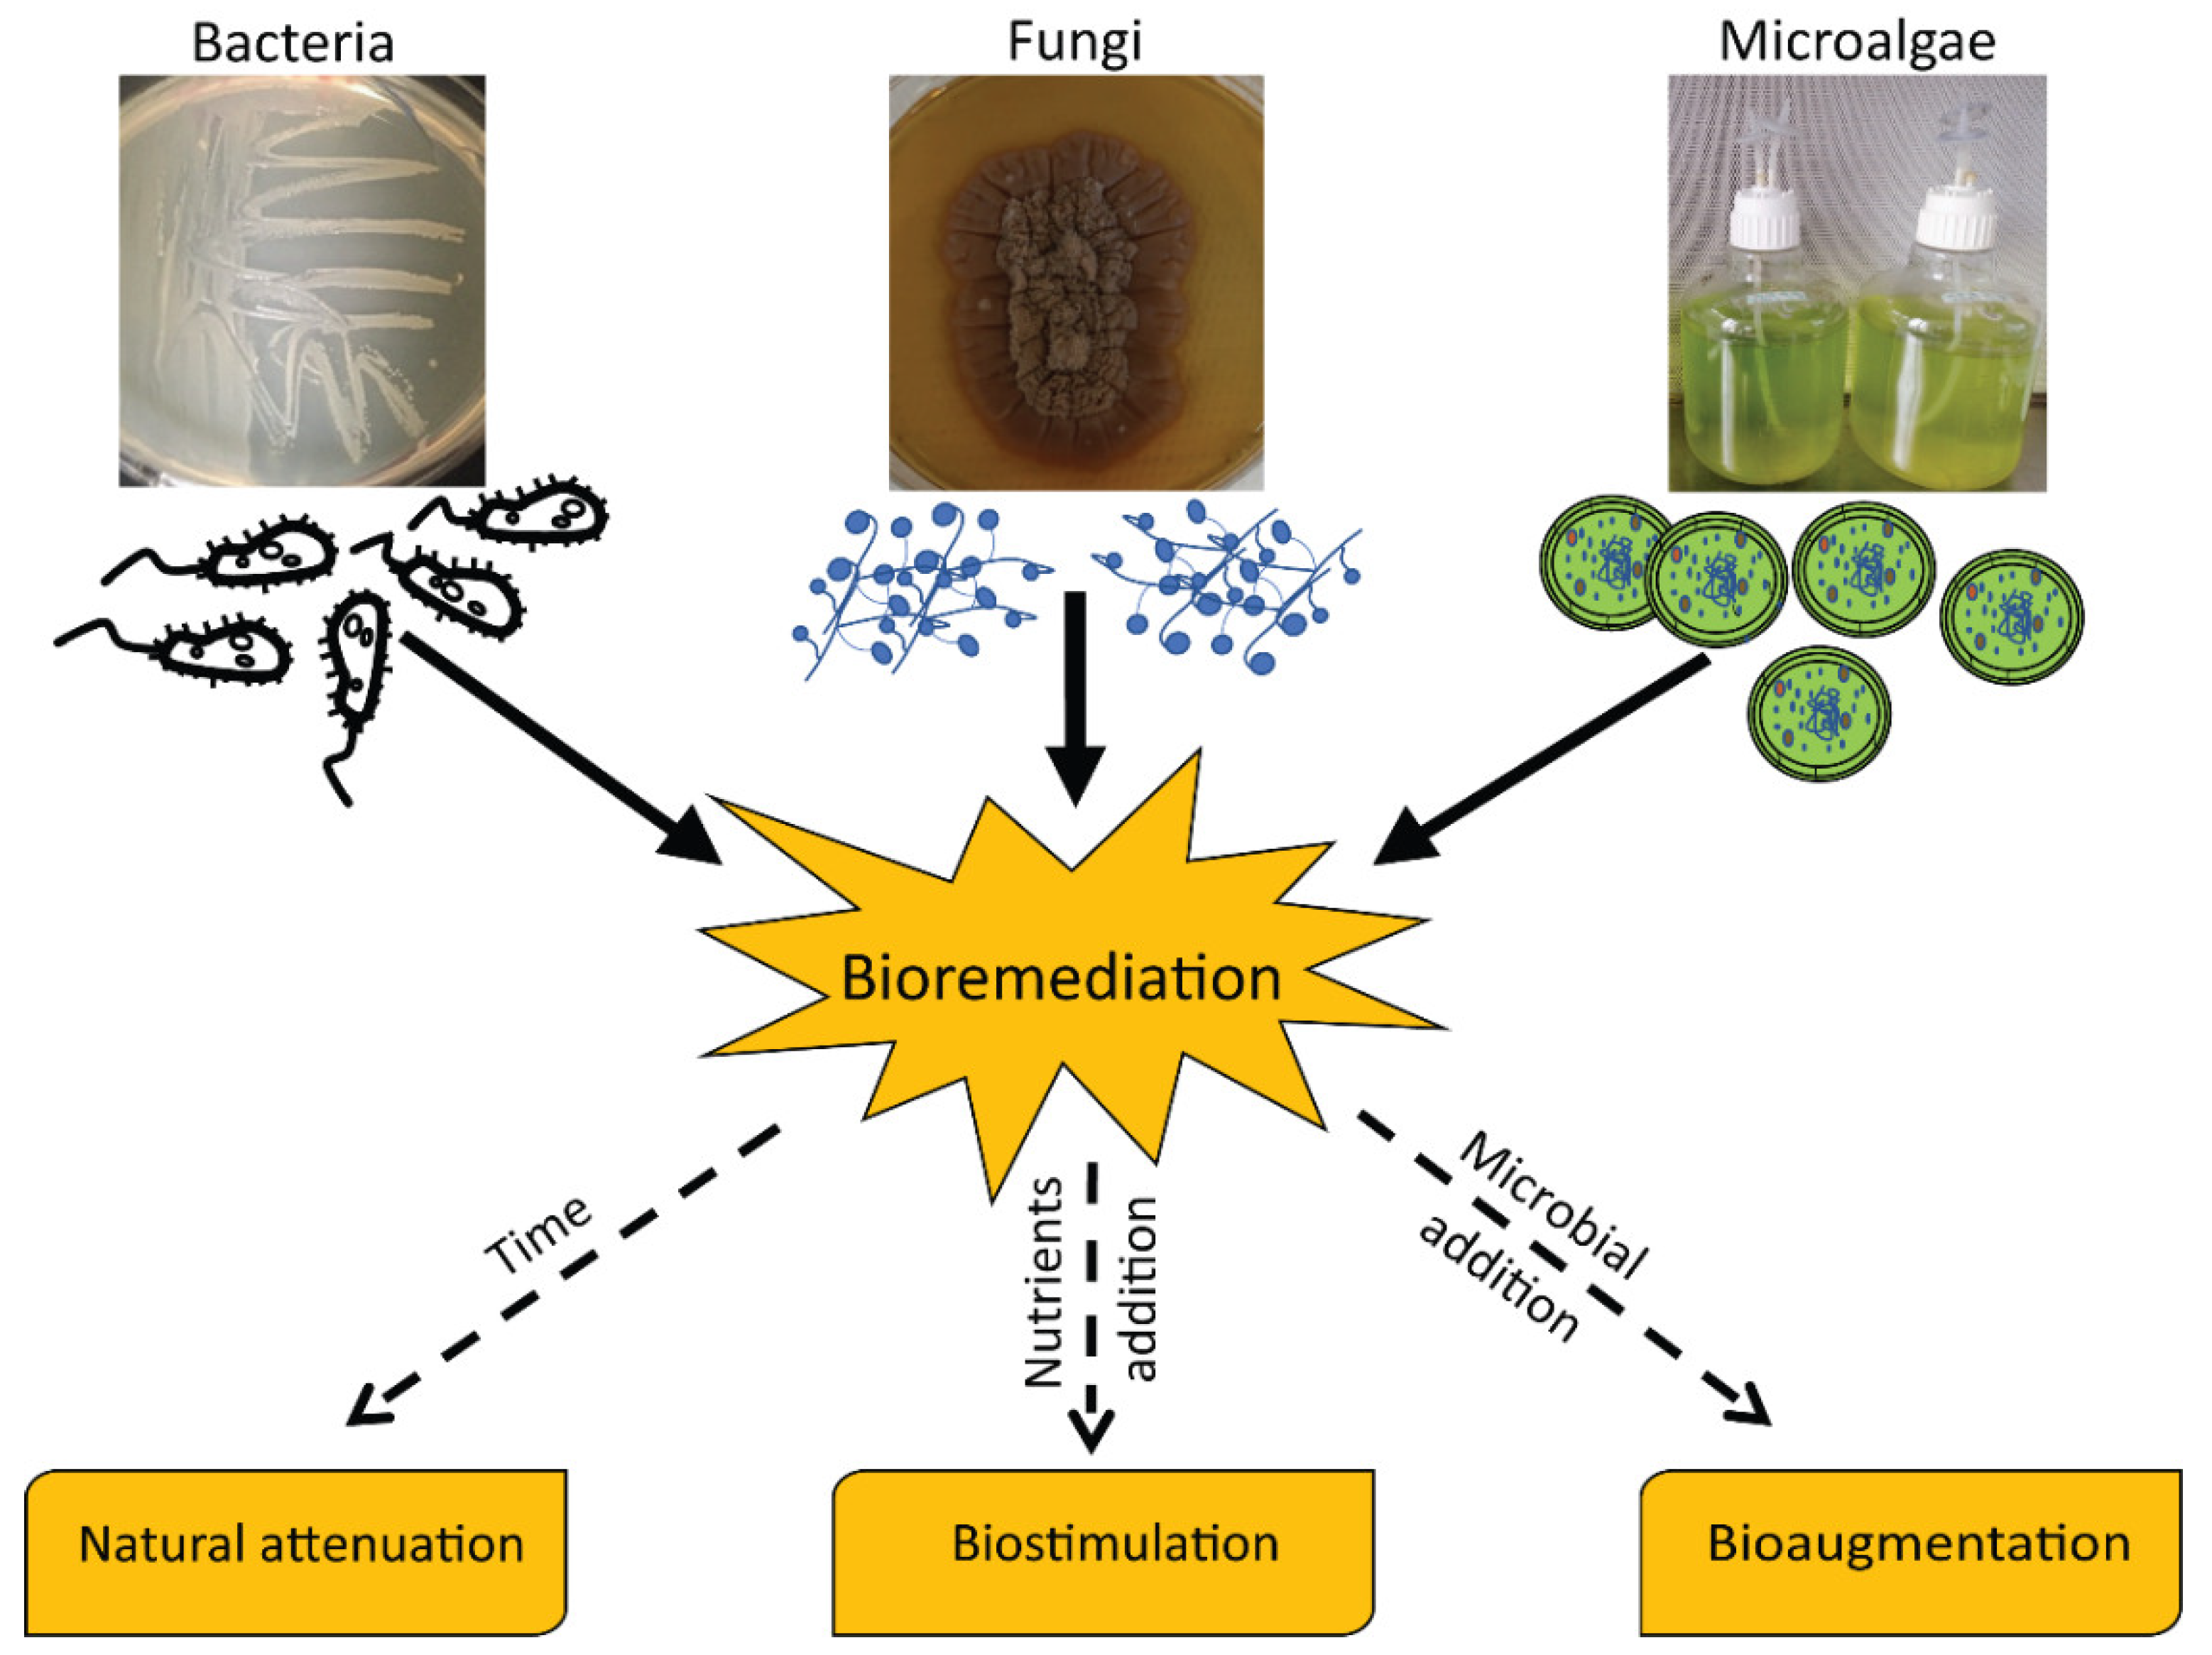 Integrating Biochar, Bacteria, and Plants for Sustainable Remediation of  Soils Contaminated with Organic Pollutants